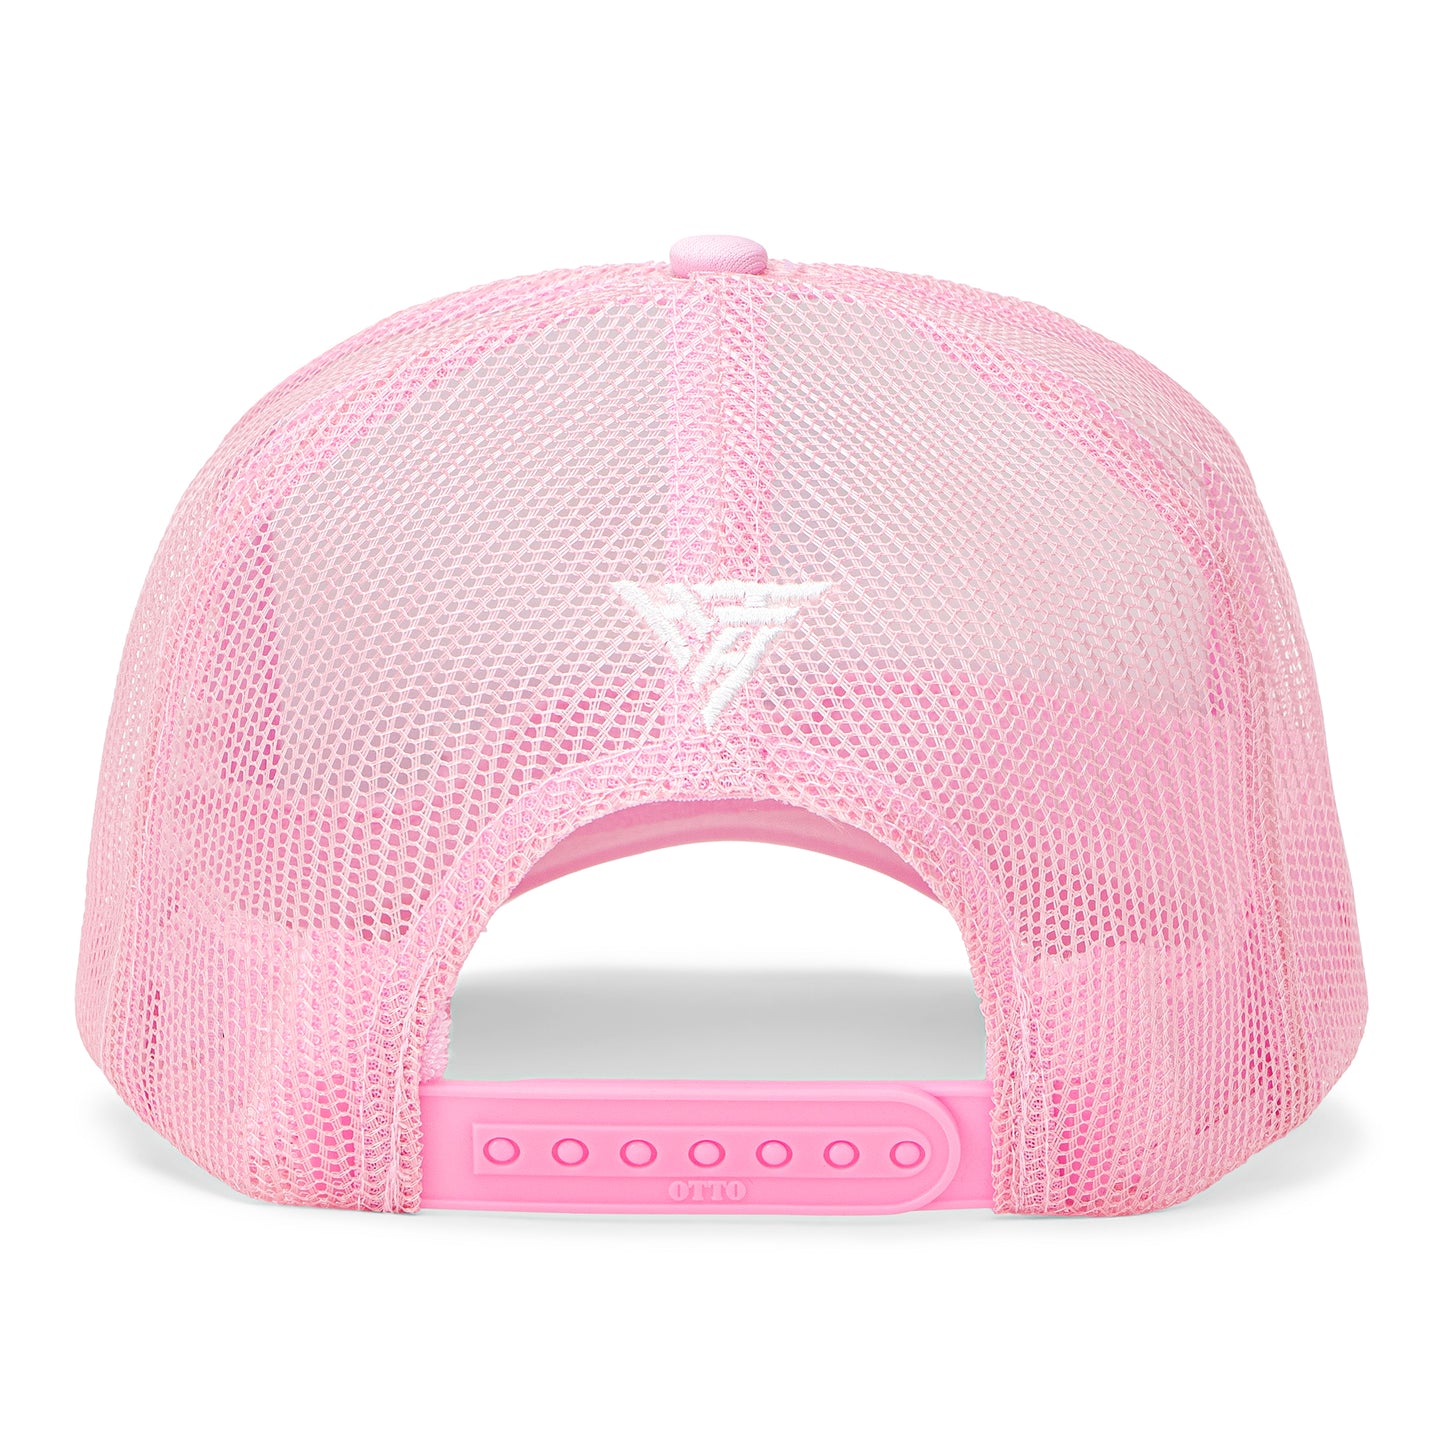 SONIC CHAO TRUCKER HAT (PINK)